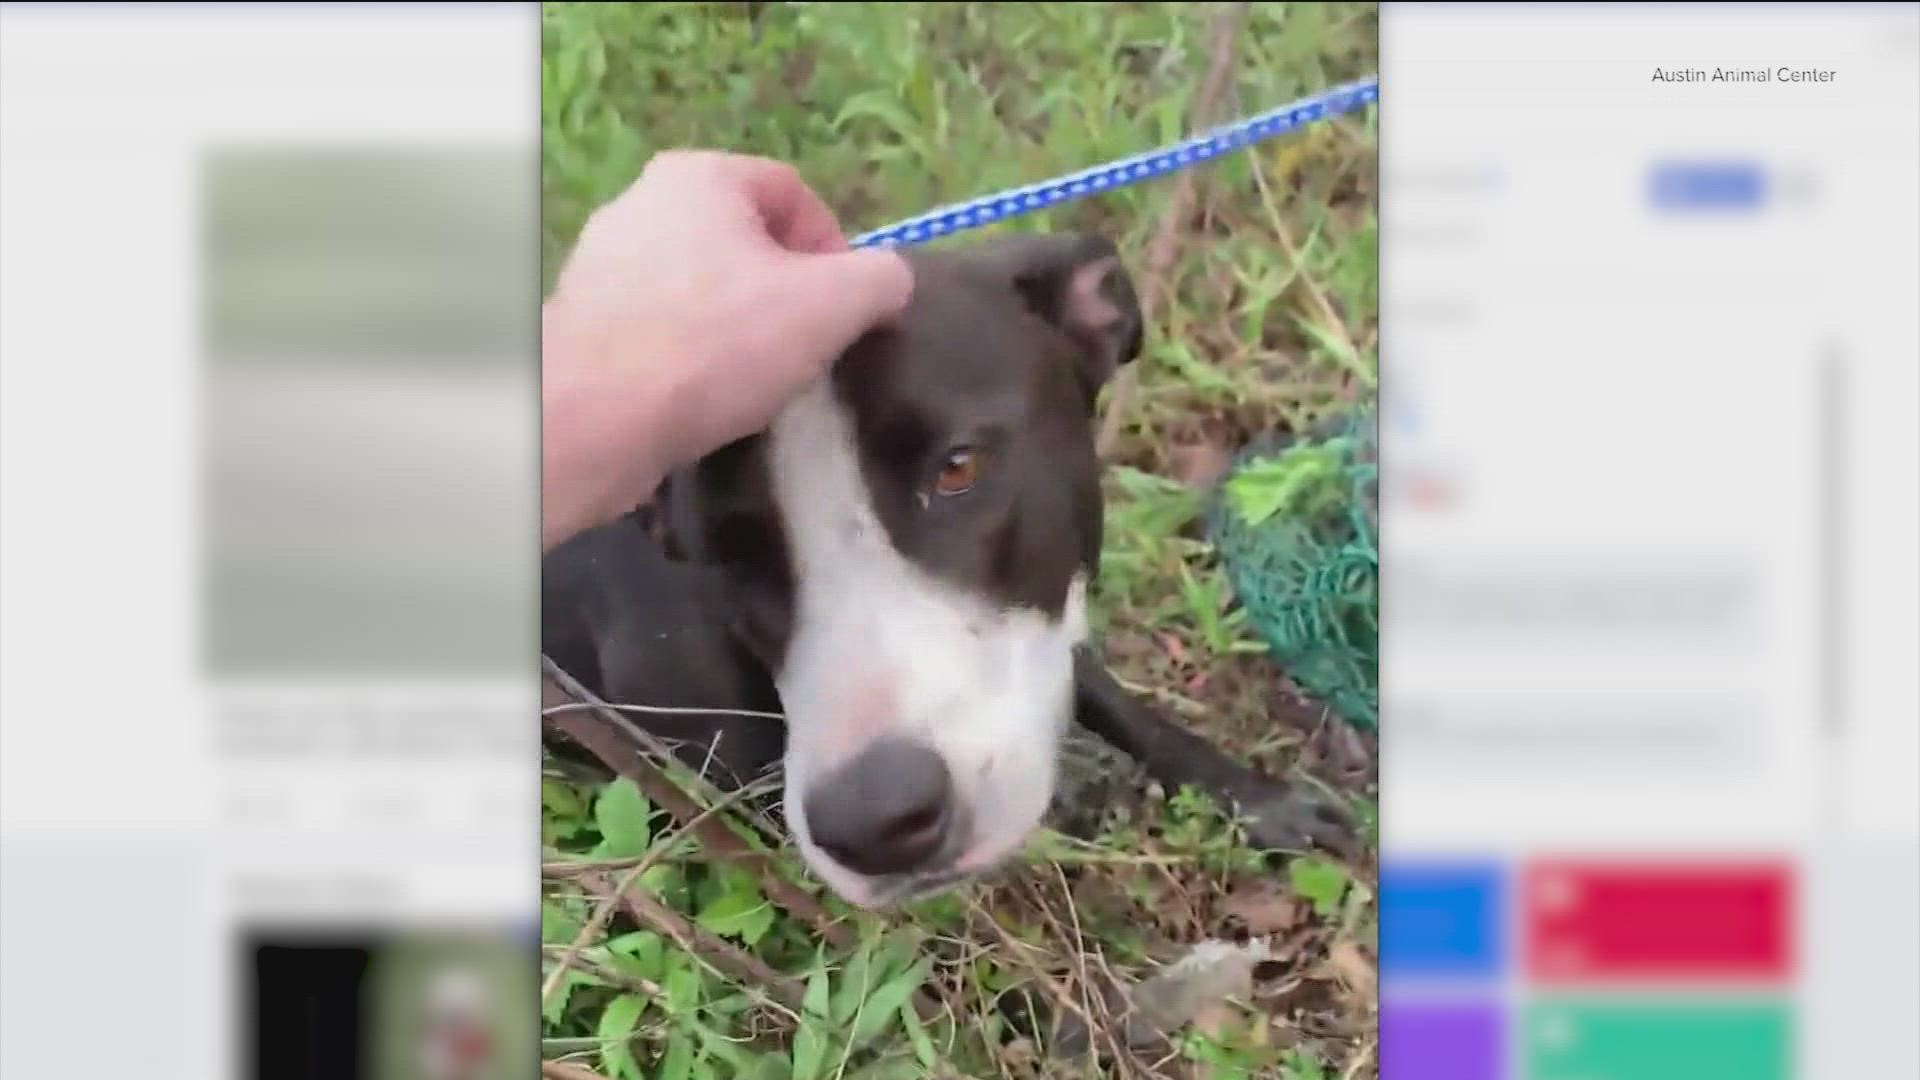 The Austin Animal Center said that, luckily, the wayward pup was microchipped.